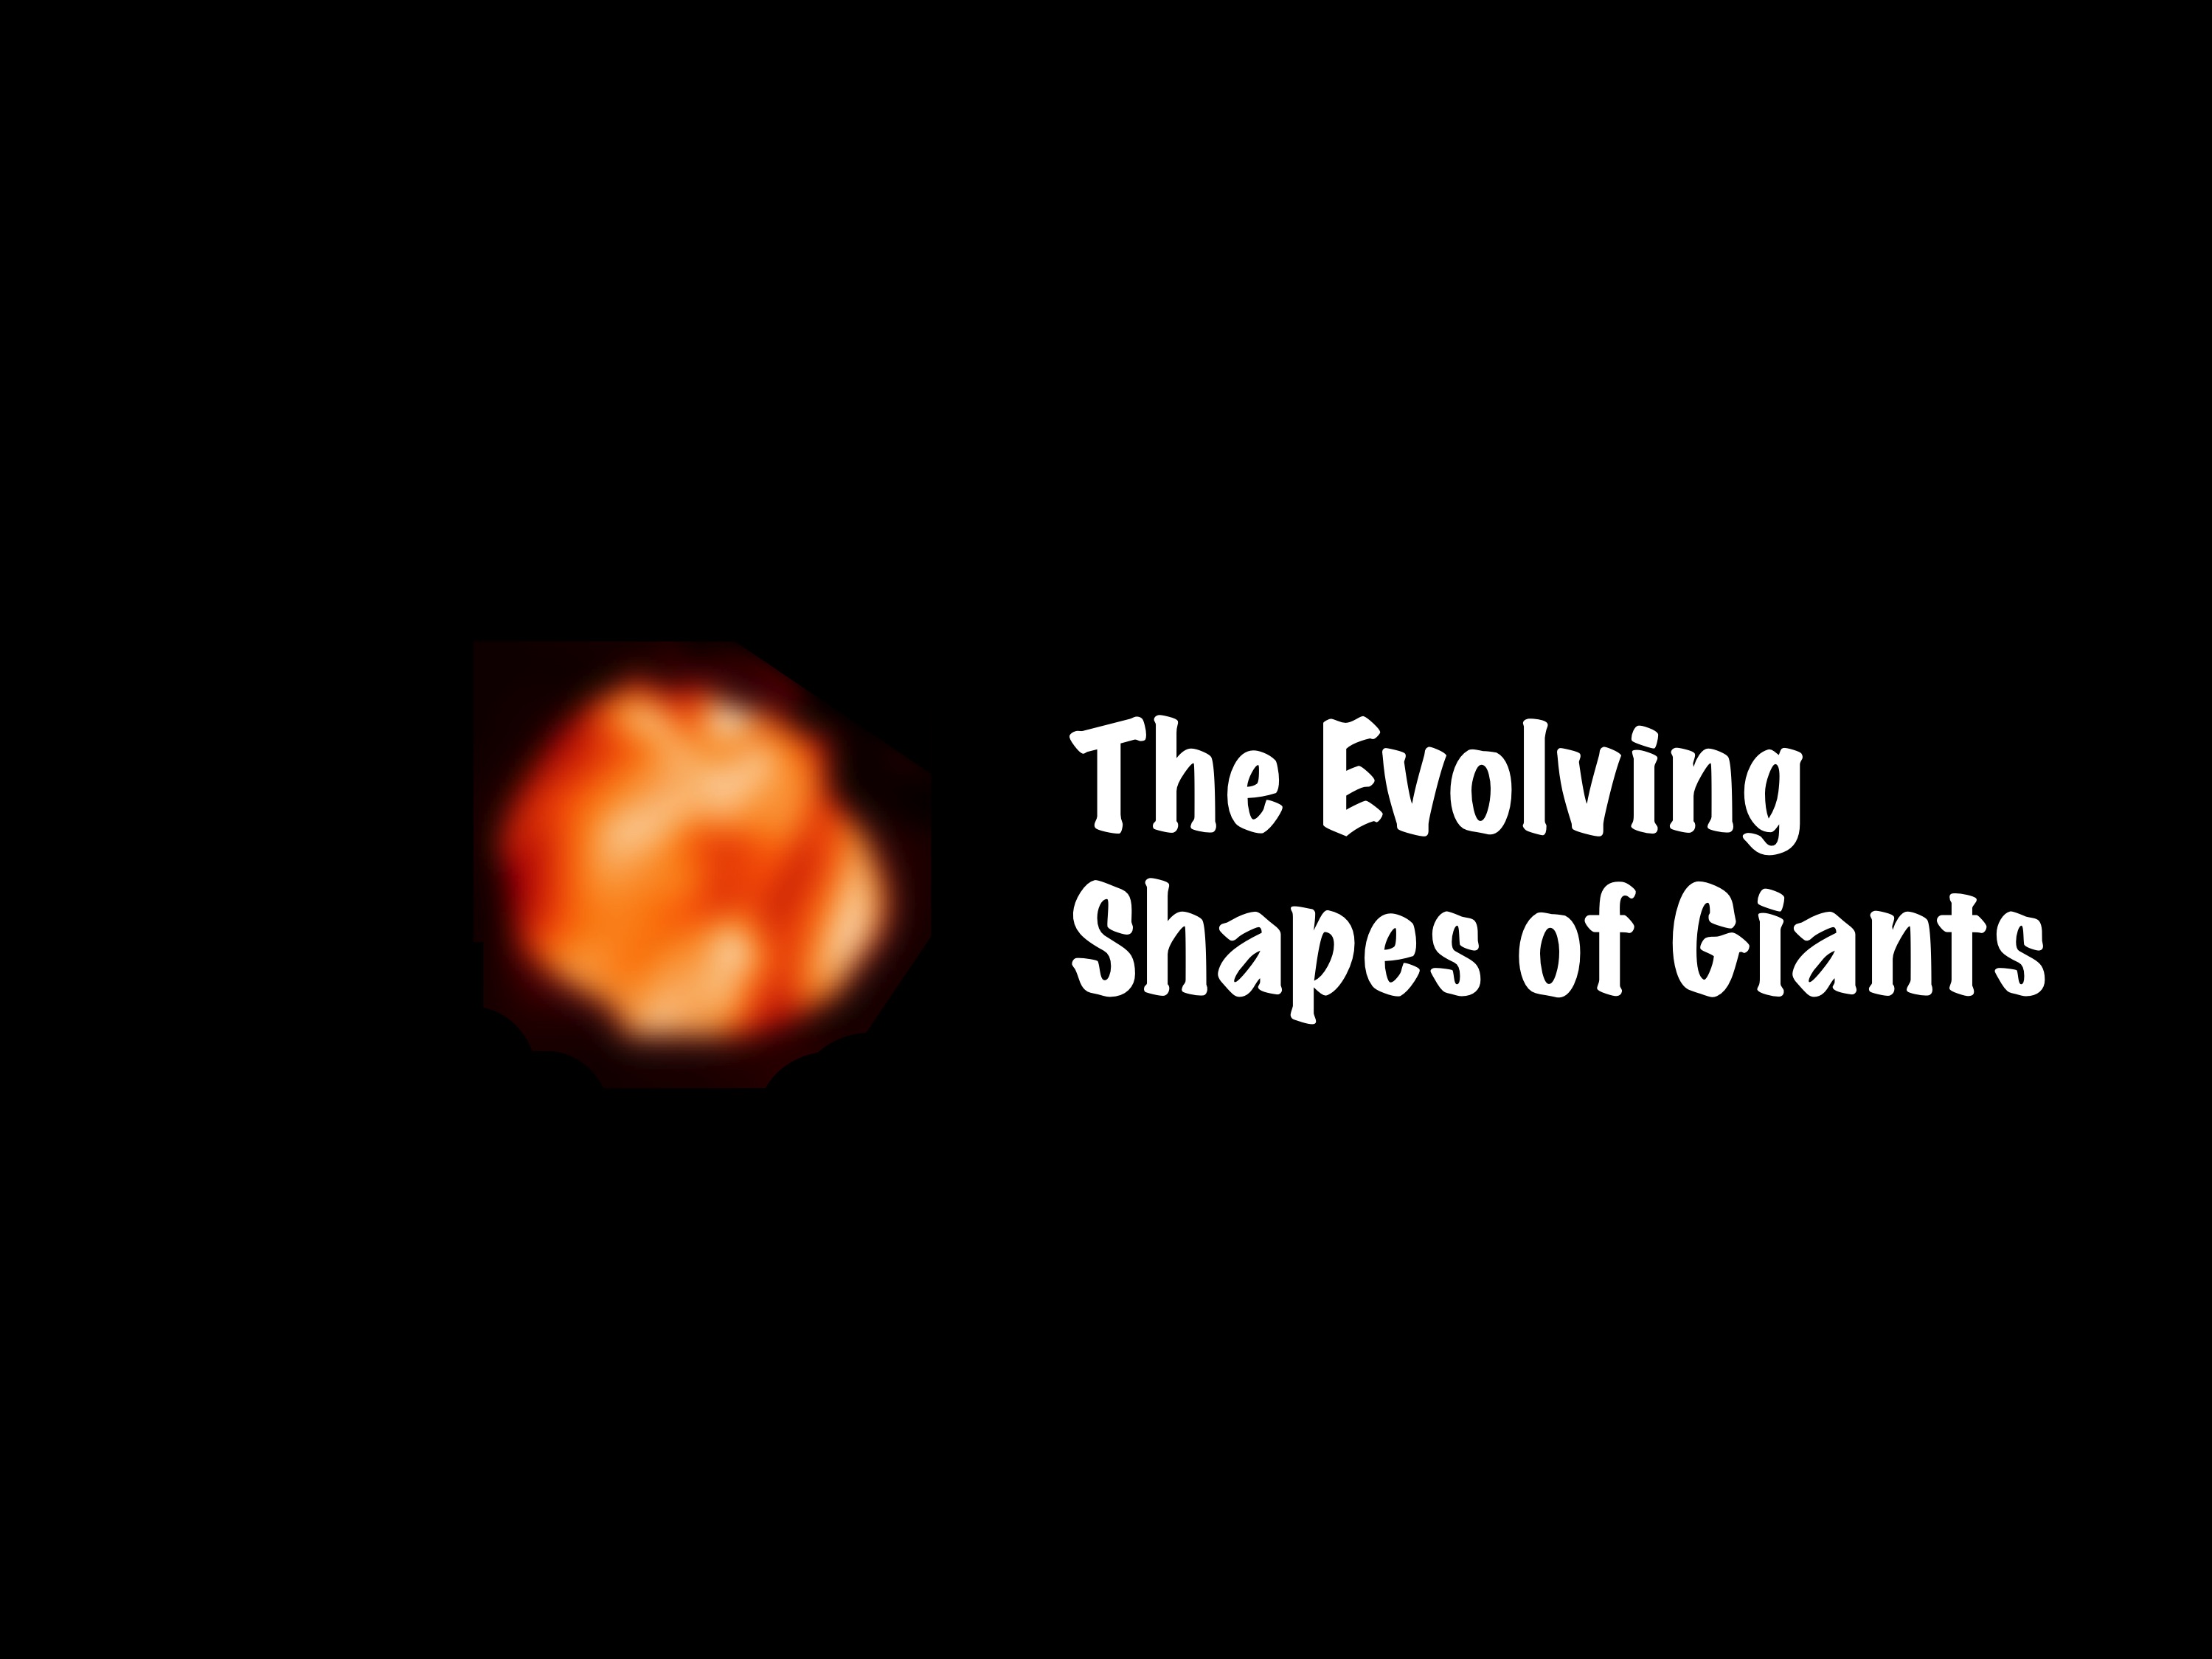 The
			     Evolving Shapes of Giants